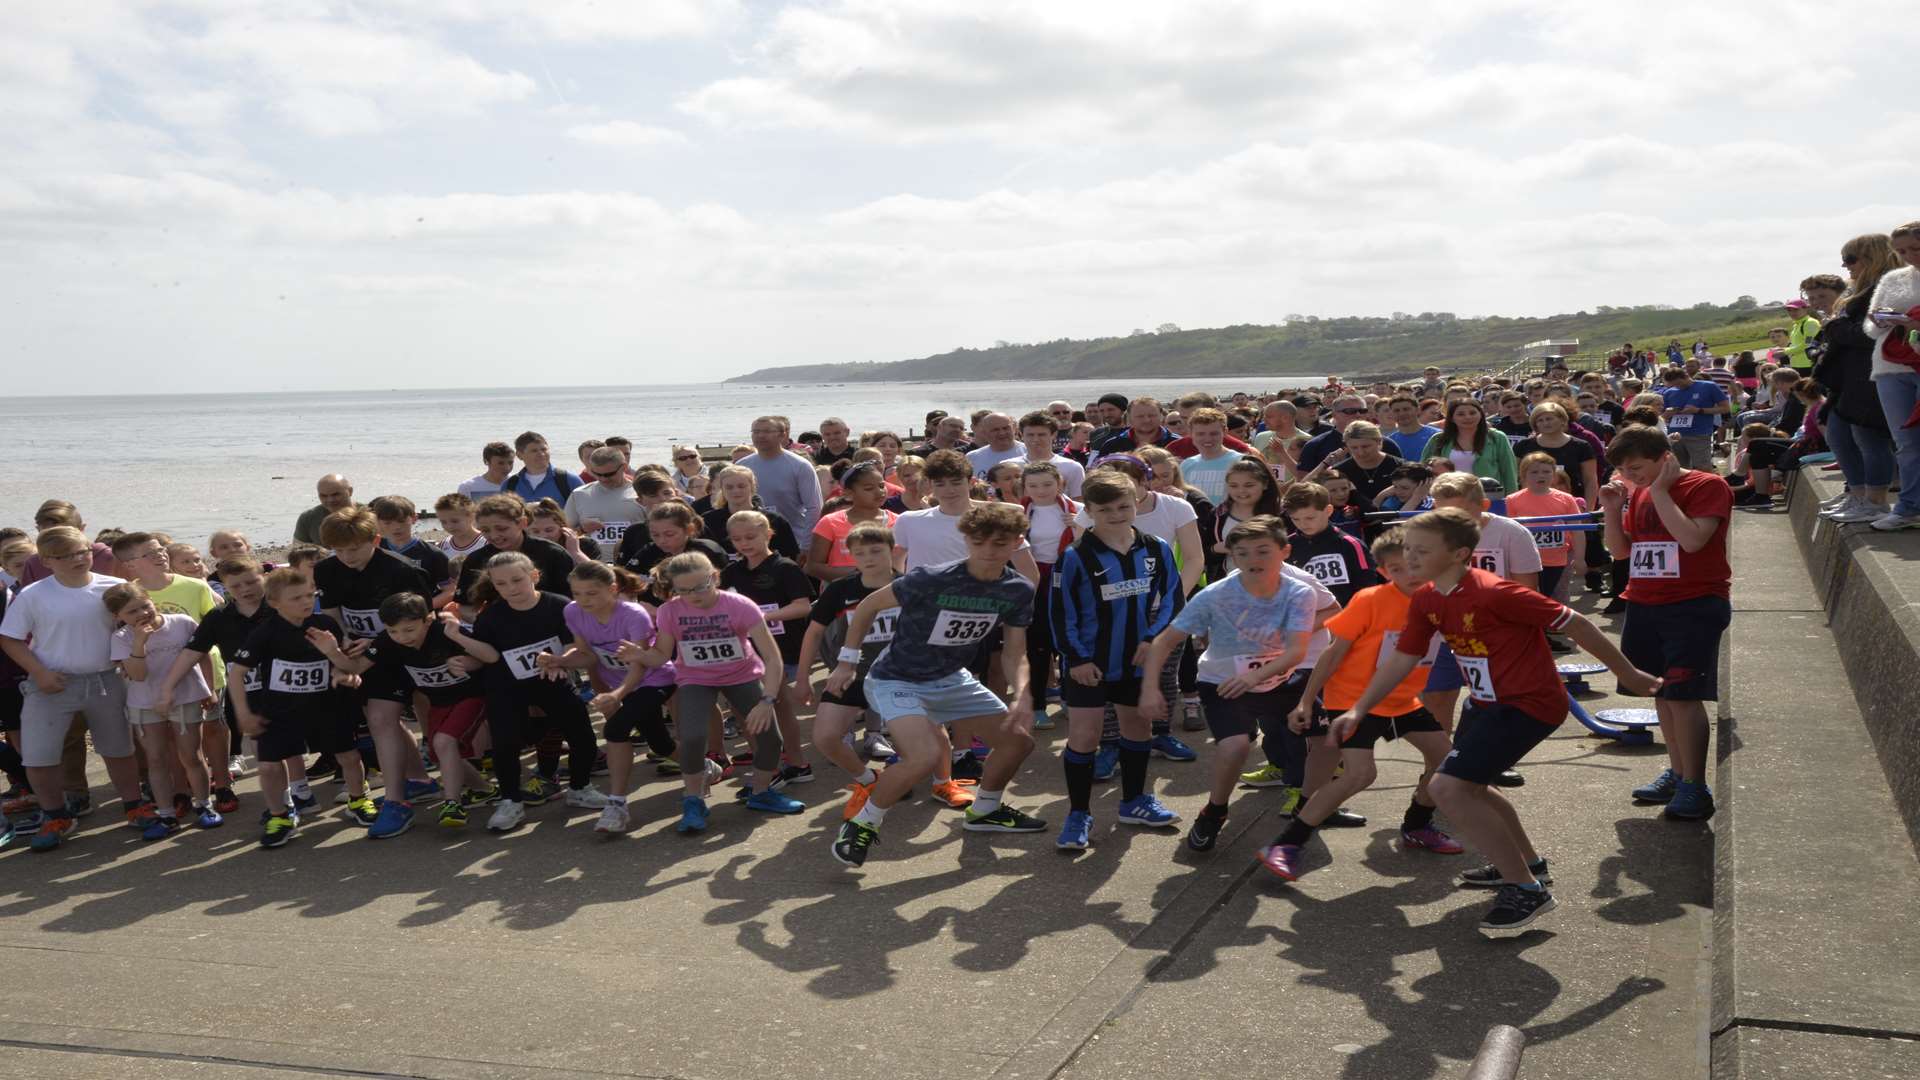 One of Sheppey's biggest fundraising events is due to finish for the tenth and last time this year